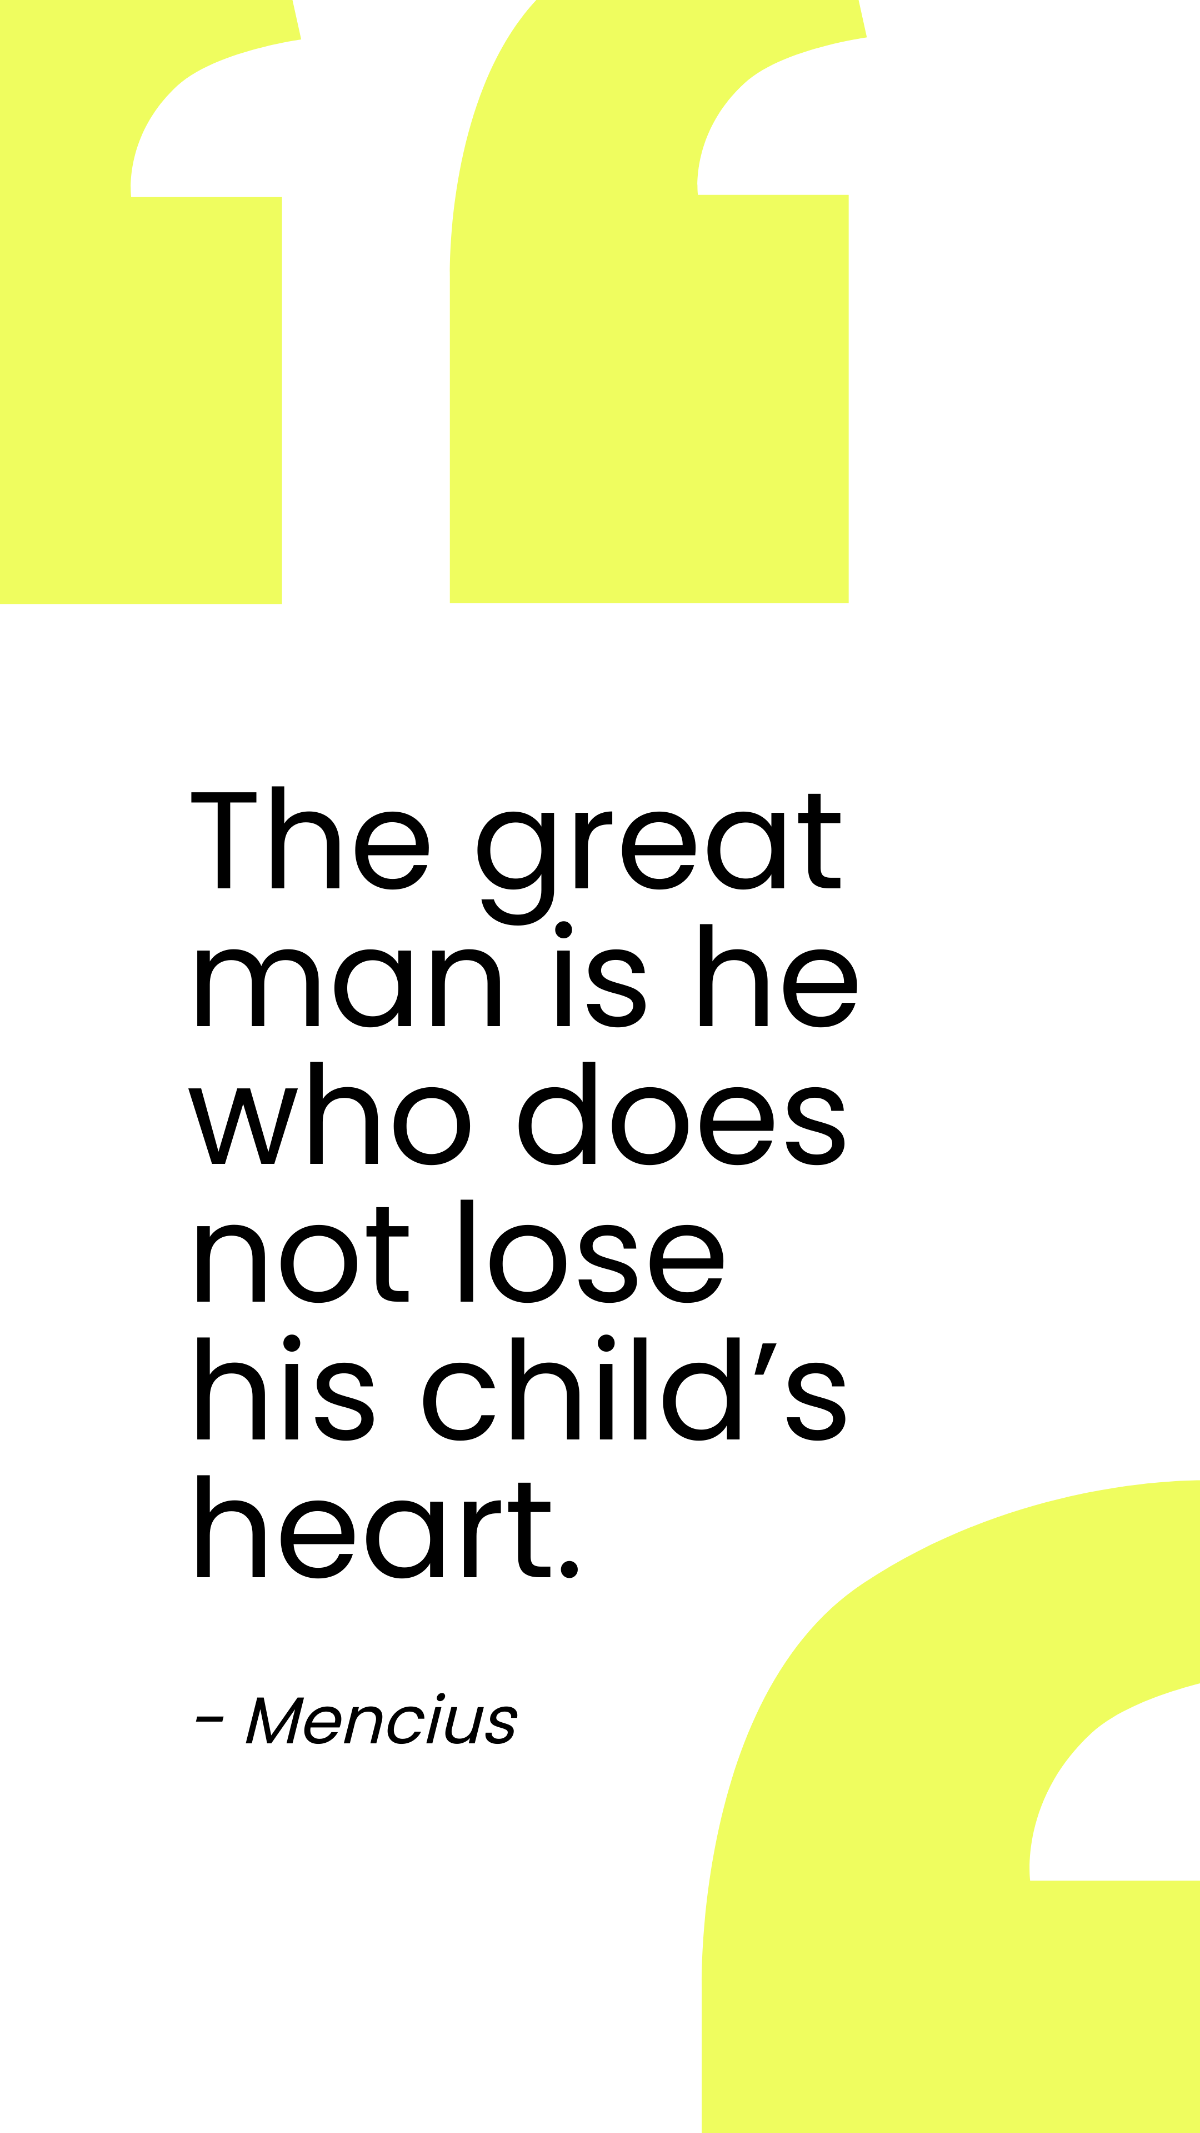 Mencius - The great man is he who does not lose his child’s heart. Template